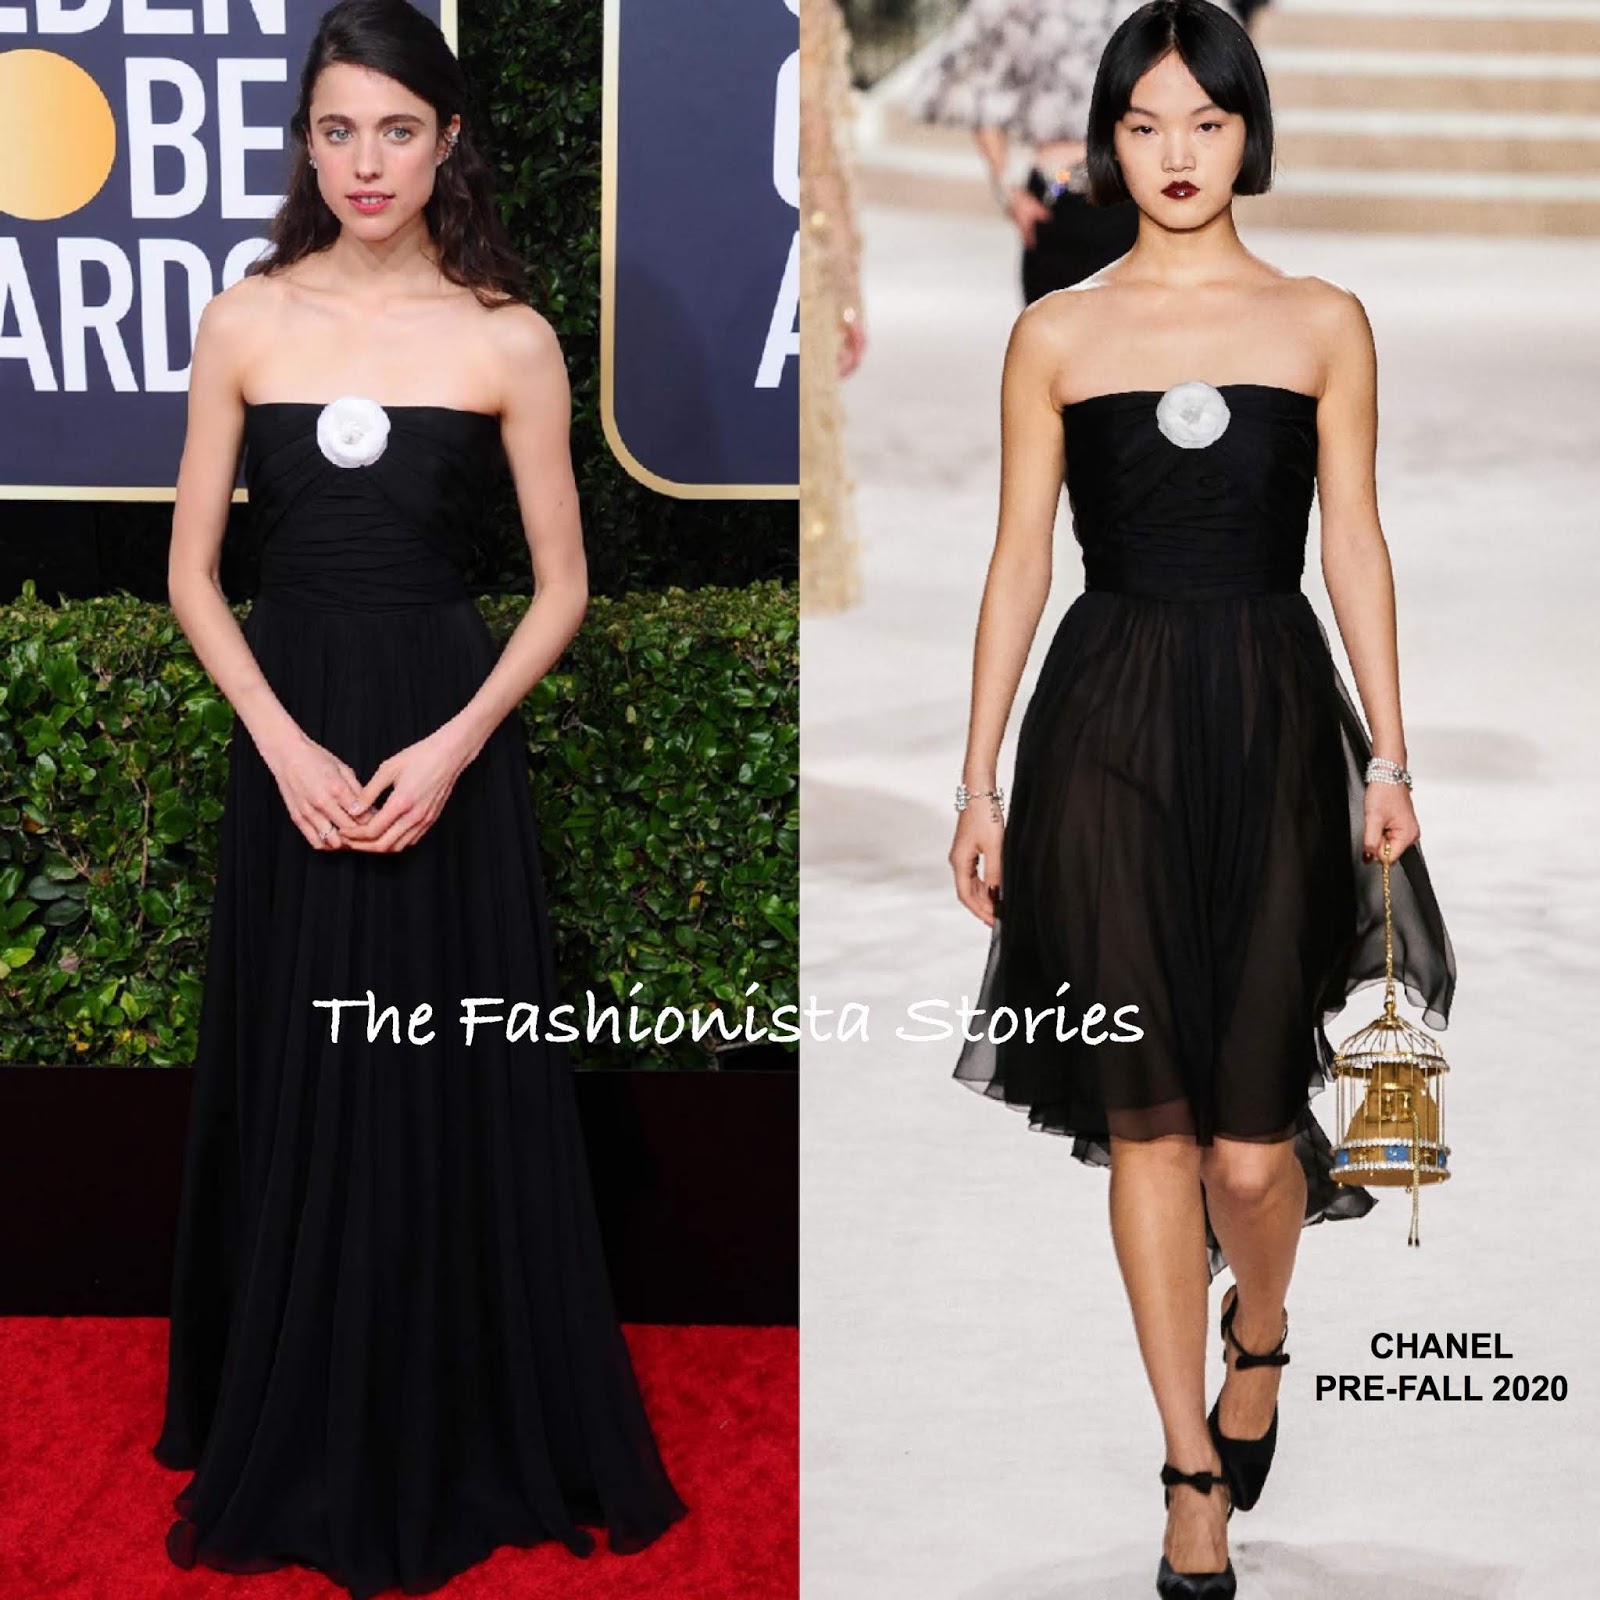 Margot Robbie & Margret Qualley in Chanel at the 77th Golden Globes Awards